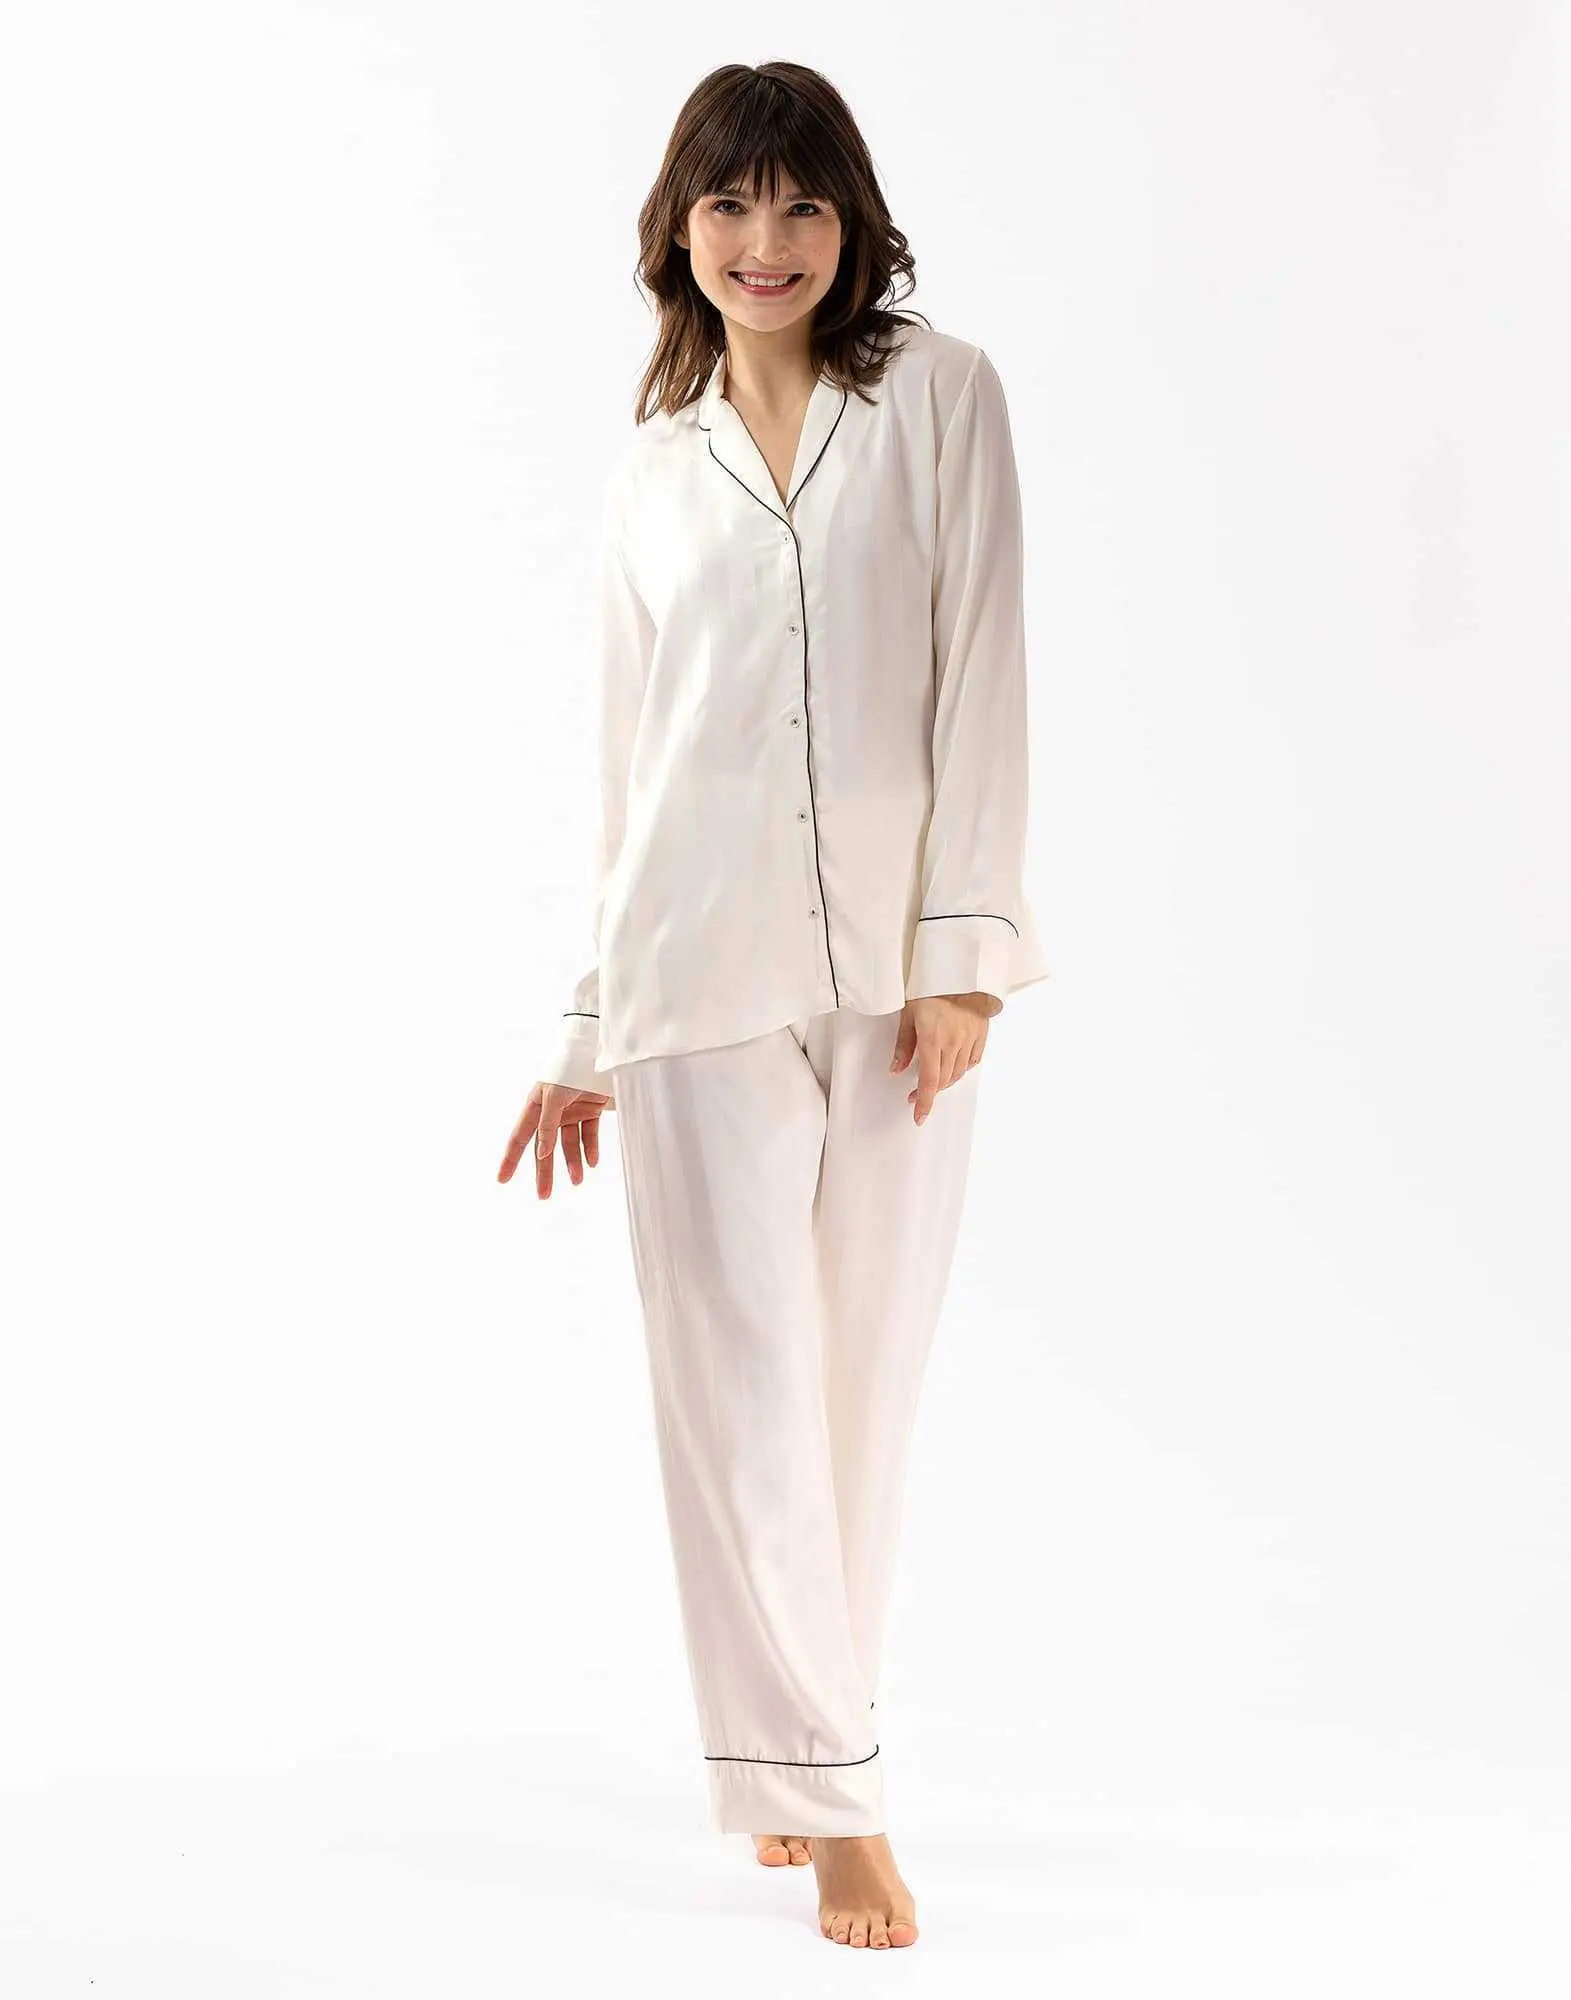 Buttoned pyjamas GABRIELLE 606 made from ecru viscose jacquard| Lingerie le Chat